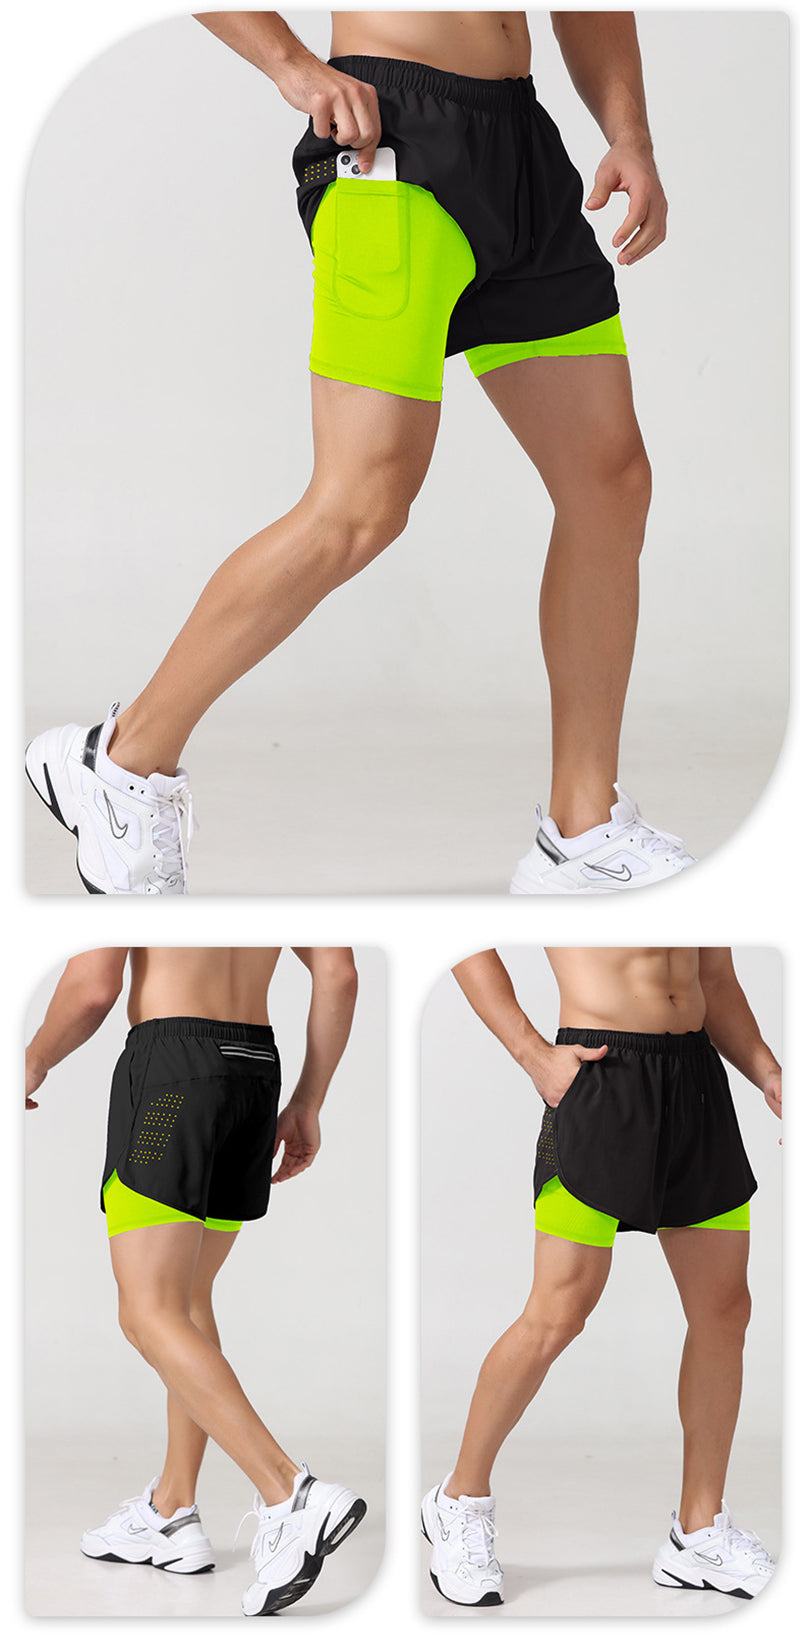 Double-Layered Quick-Dry Runners Shorts